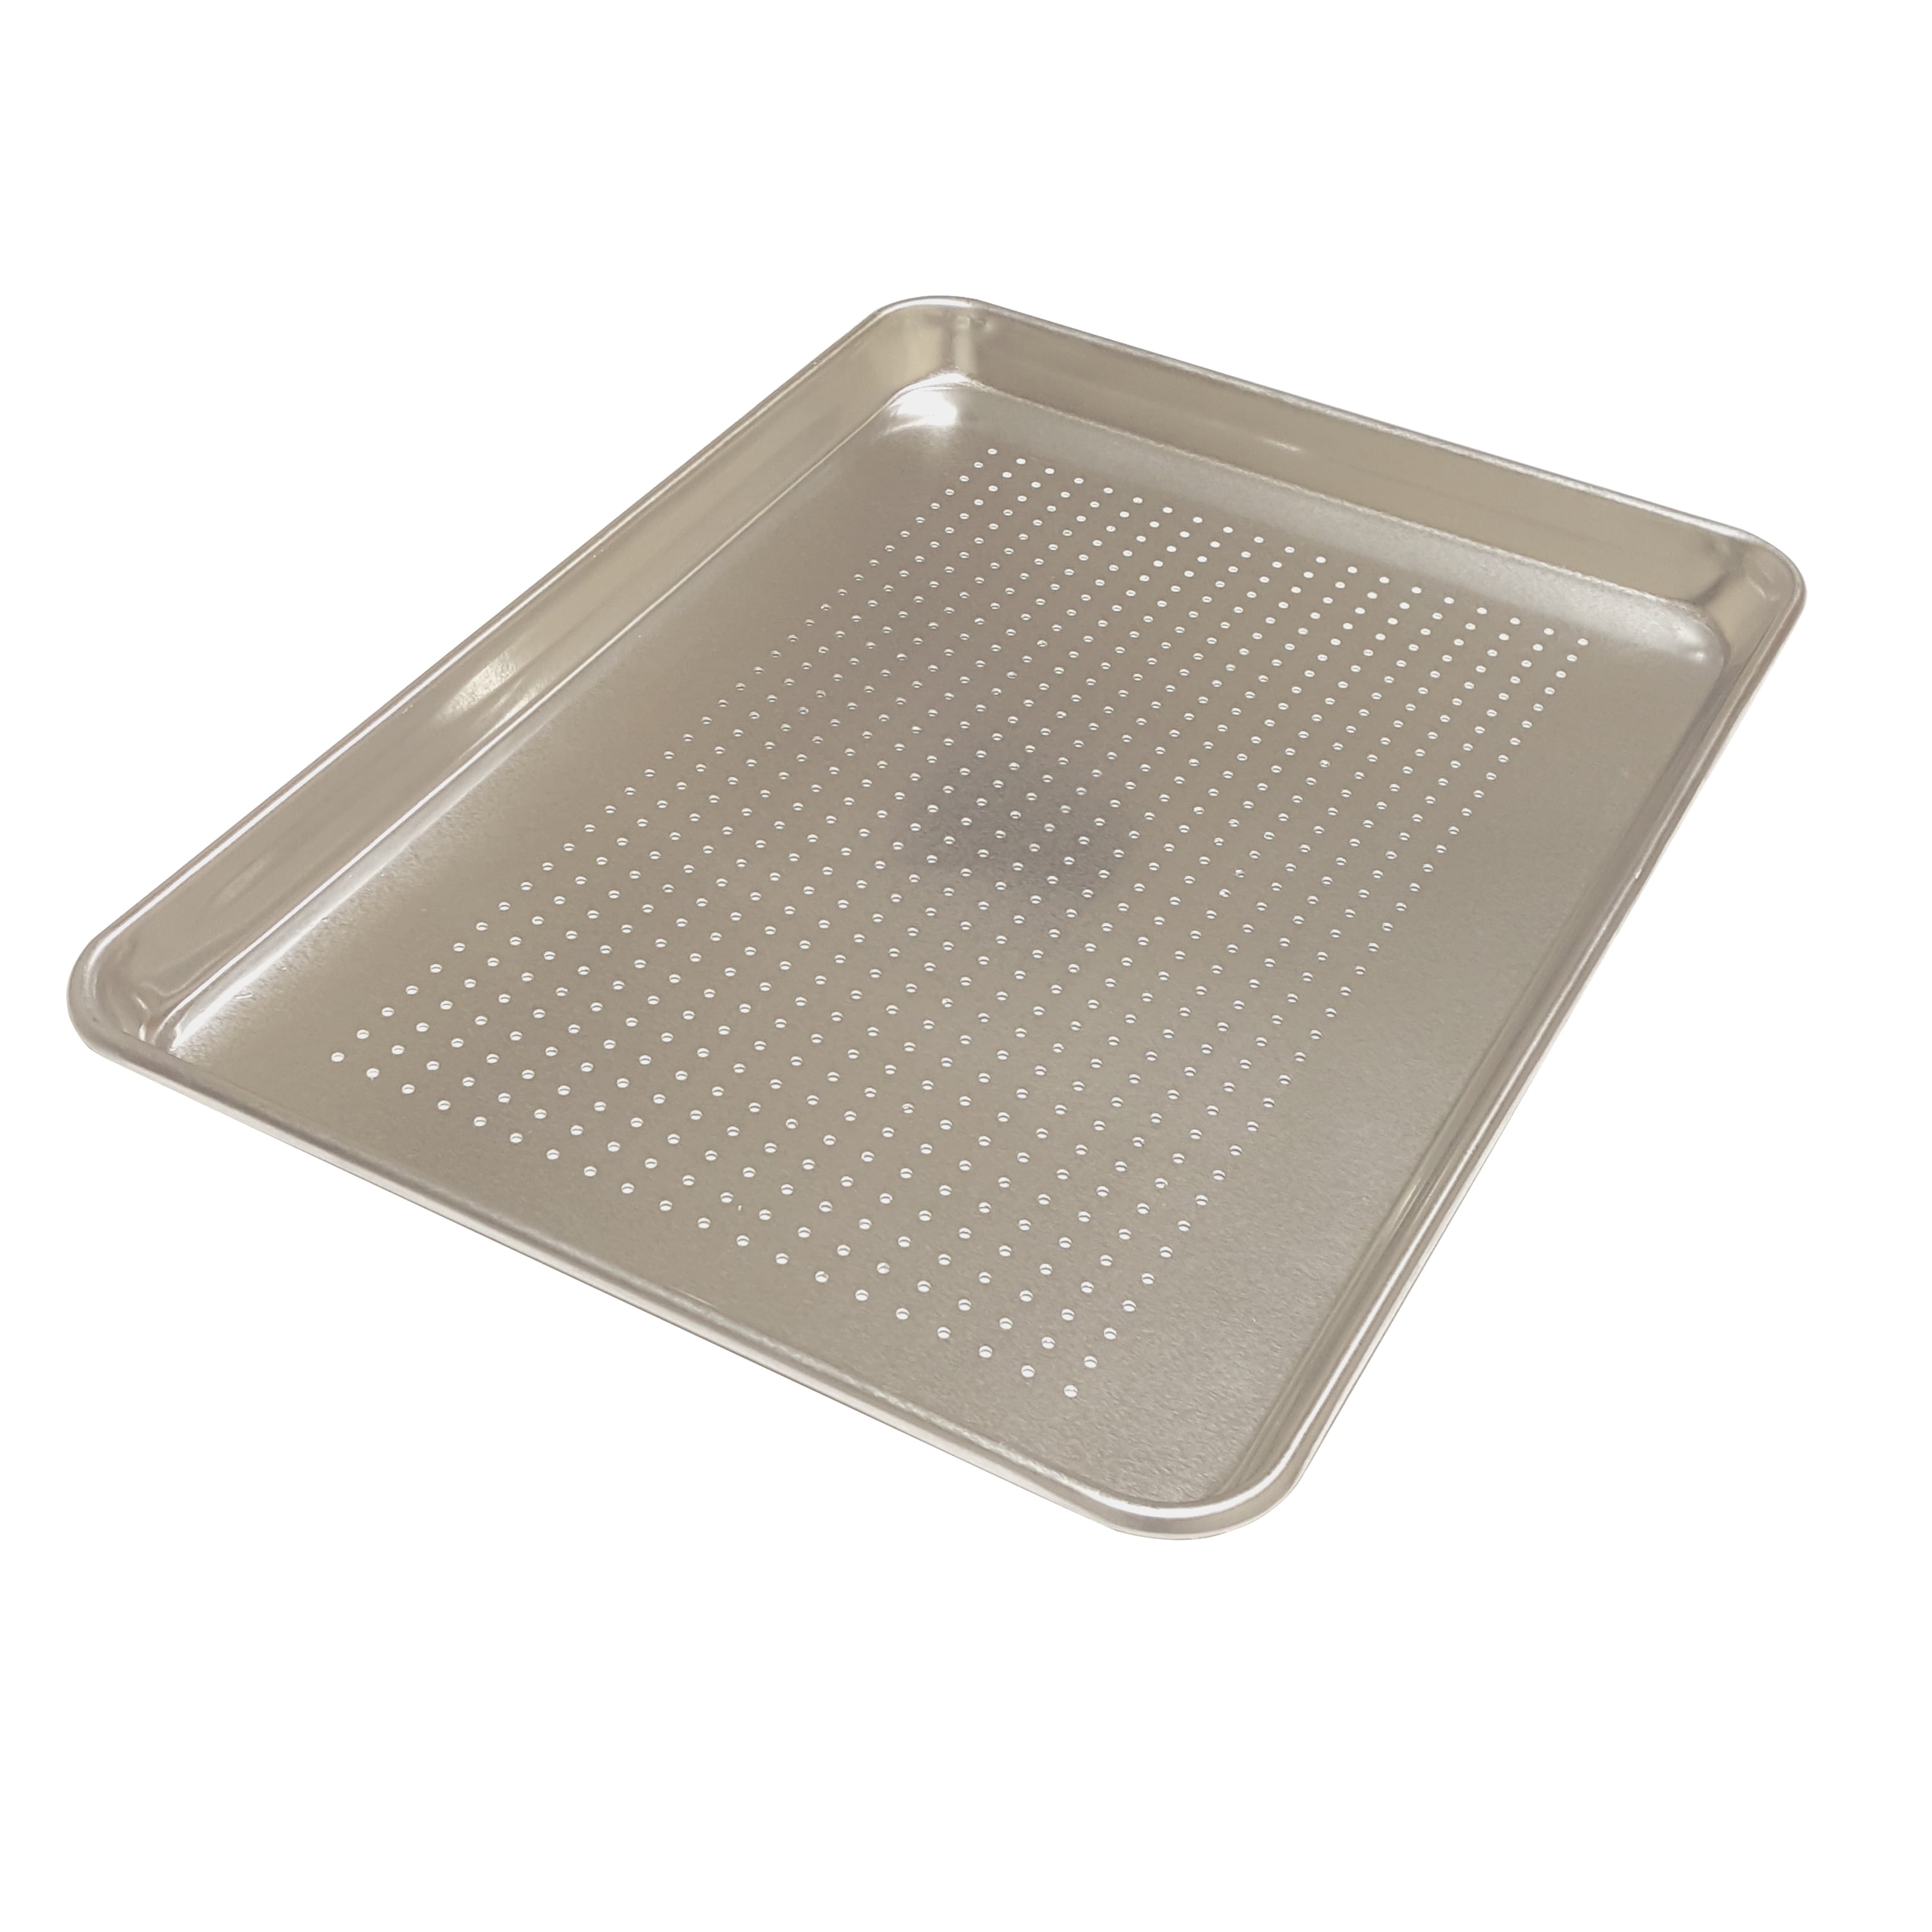 Perforated Full Size Sheet Pan 18x26, Used - Discount Bakery Equipment